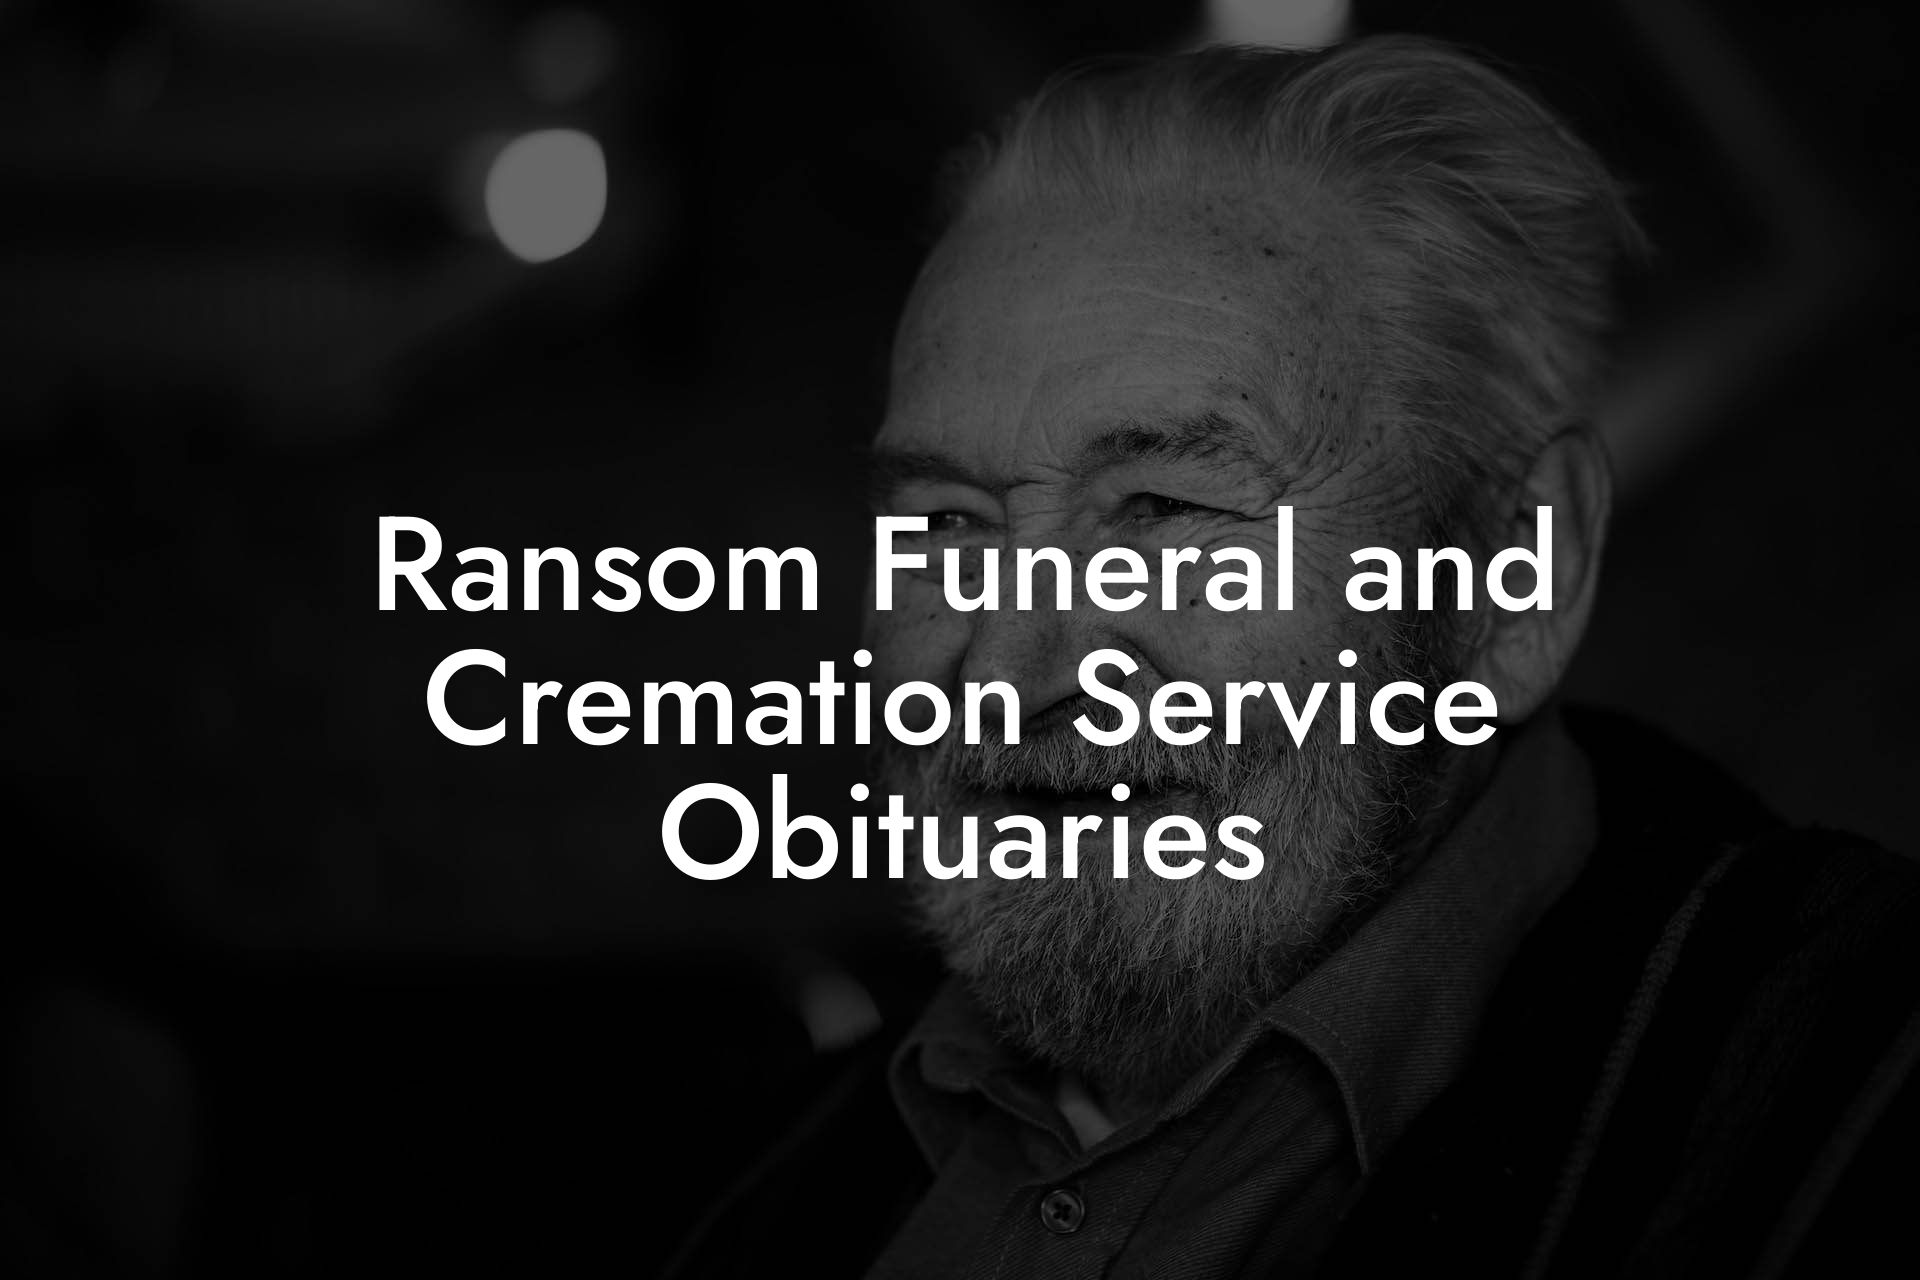 Ransom Funeral and Cremation Service Obituaries